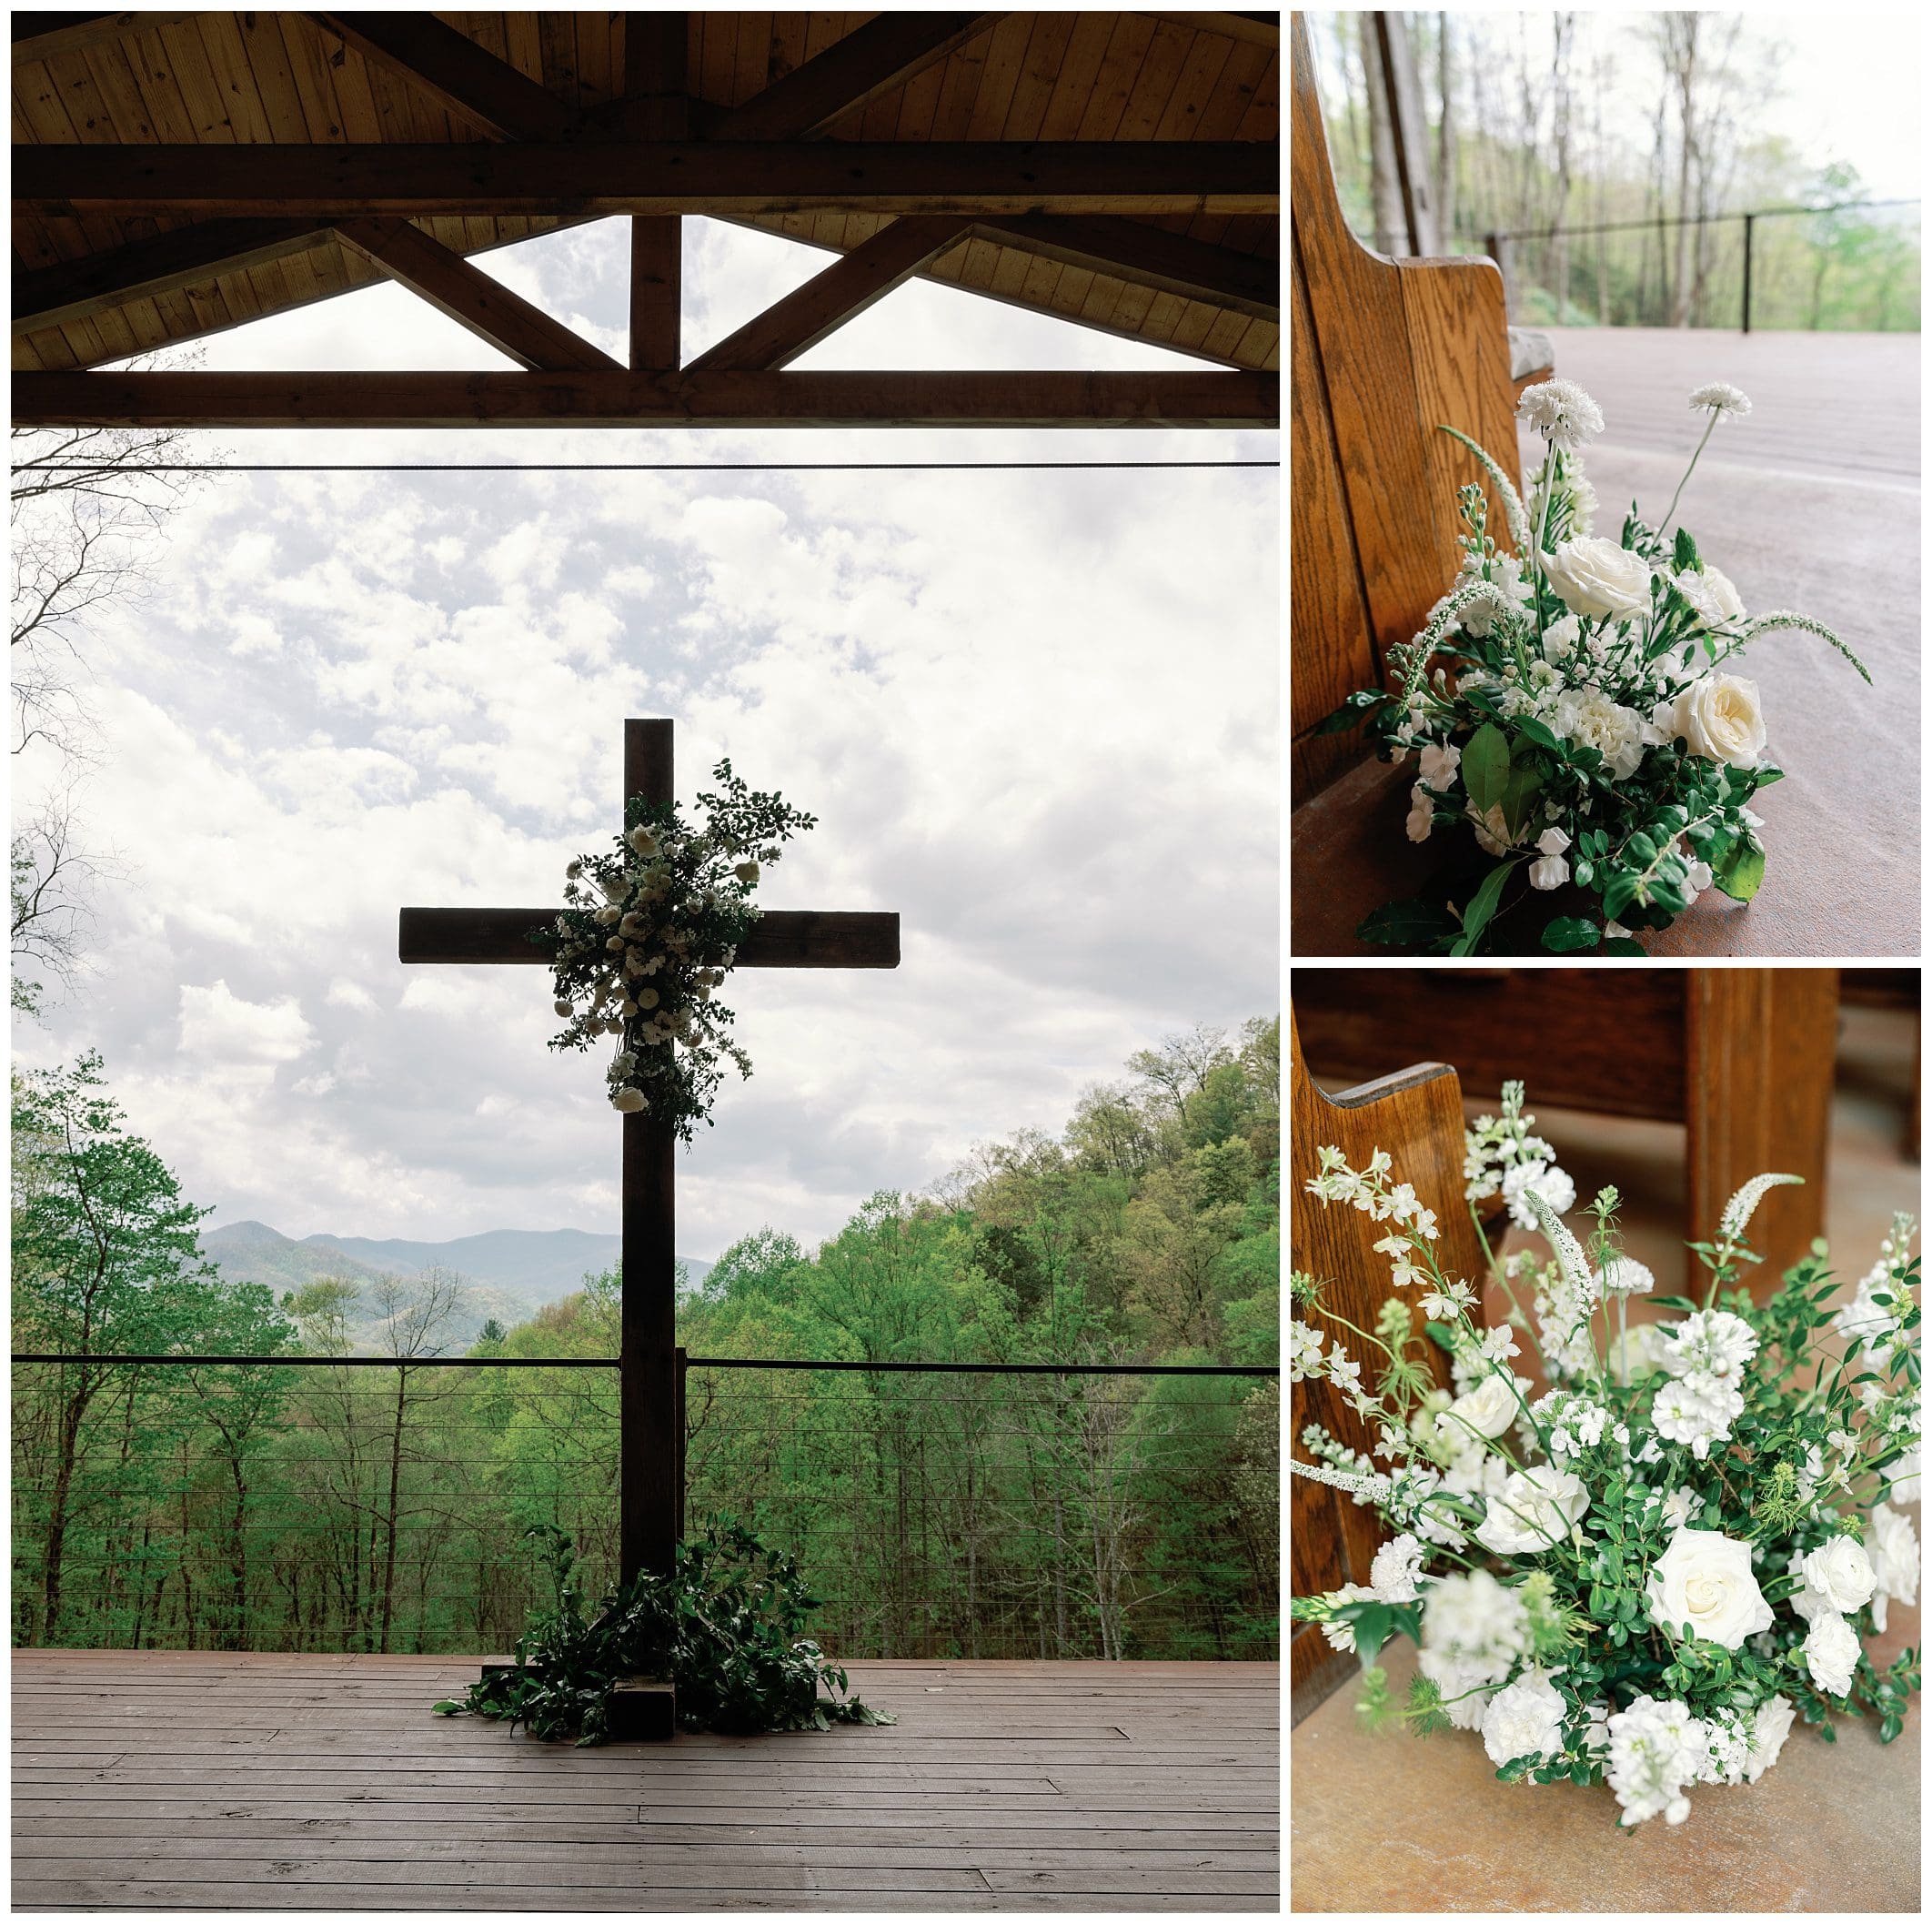 A collage of three images: a wooden cross decorated with flowers overlooking a mountain range, a close-up of a floral bouquet on a wooden bench, and another angle of the same bouquet.